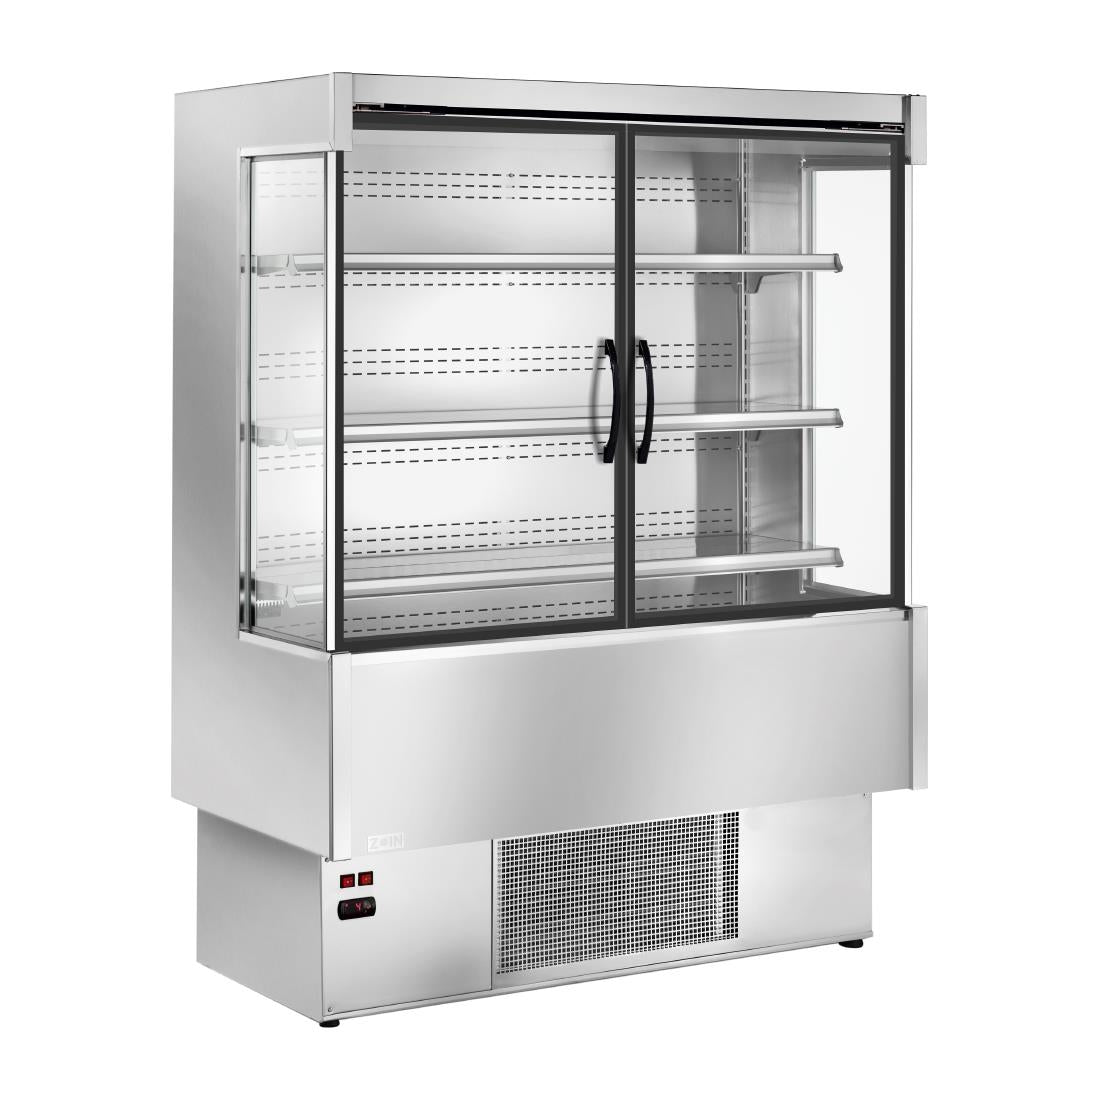 UA057-150 Zoin Silver Multideck Display Stainless Steel Finish with Hinged Doors 1500mm